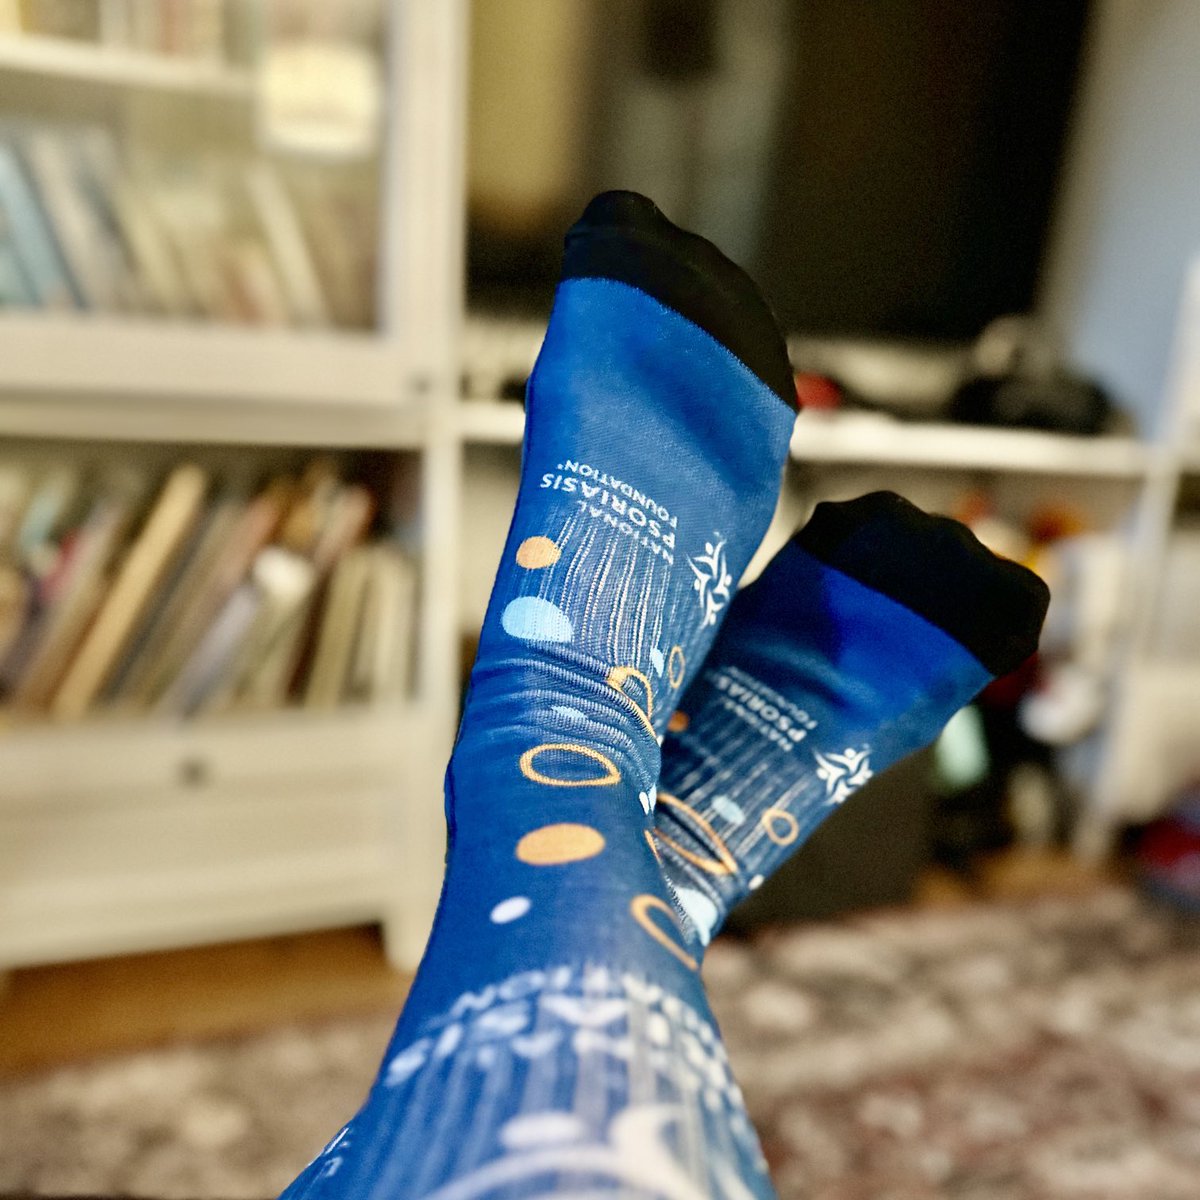 How do you recover from #WorldPsoriasisDay, ⁦@NPF⁩ Take Action Greater DC, an NPF community conference and a busy family sports weekend? NPF compression socks, of course! Love my #NPFtakeaction fundraising incentive! p2p.onecause.com/takeaction/lea…